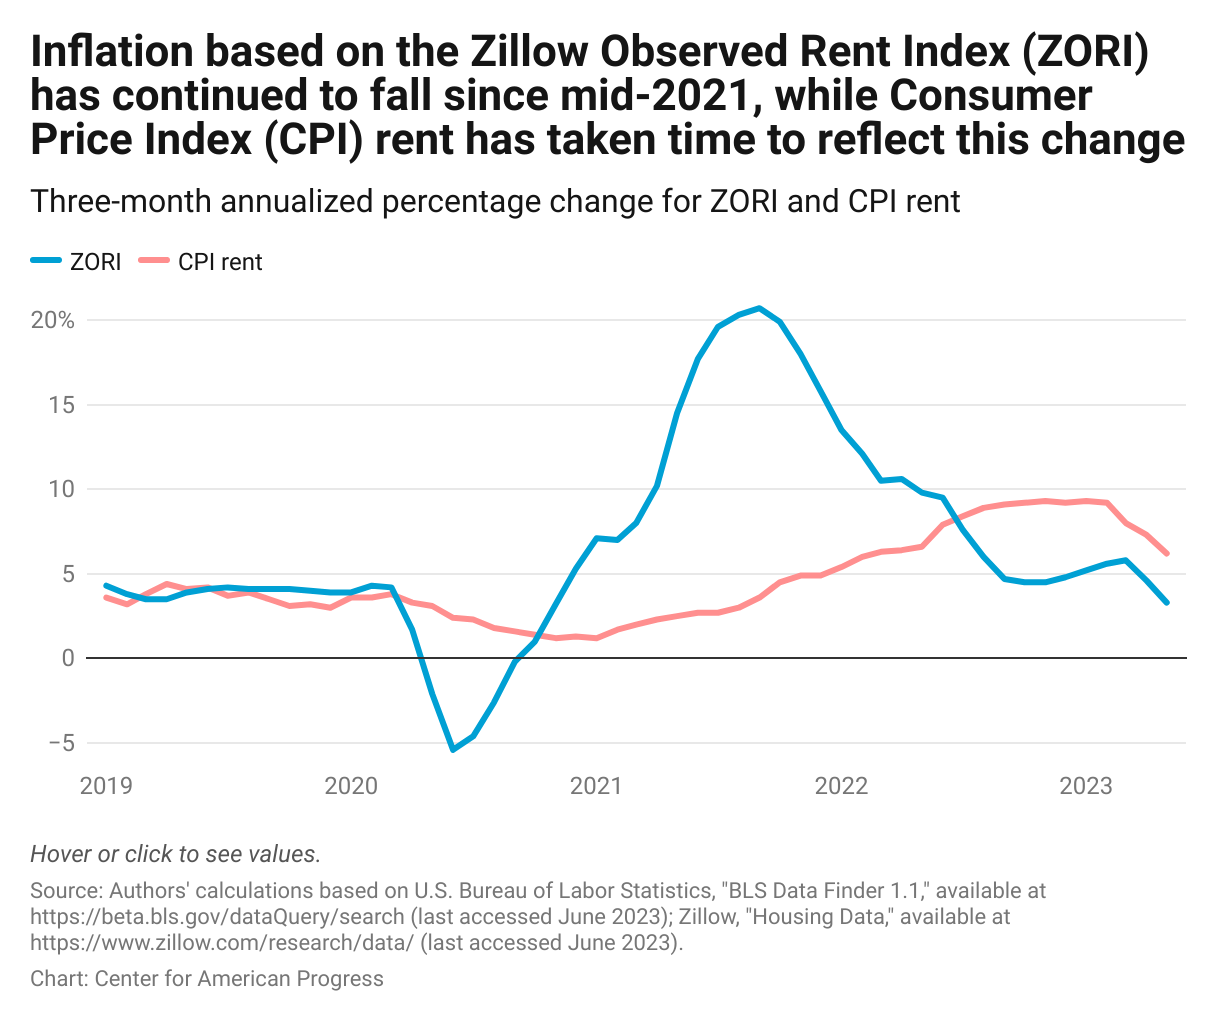 Line graph showing that ZORI has been falling since 2021, while CPI rent has continued to increased during the same time period.